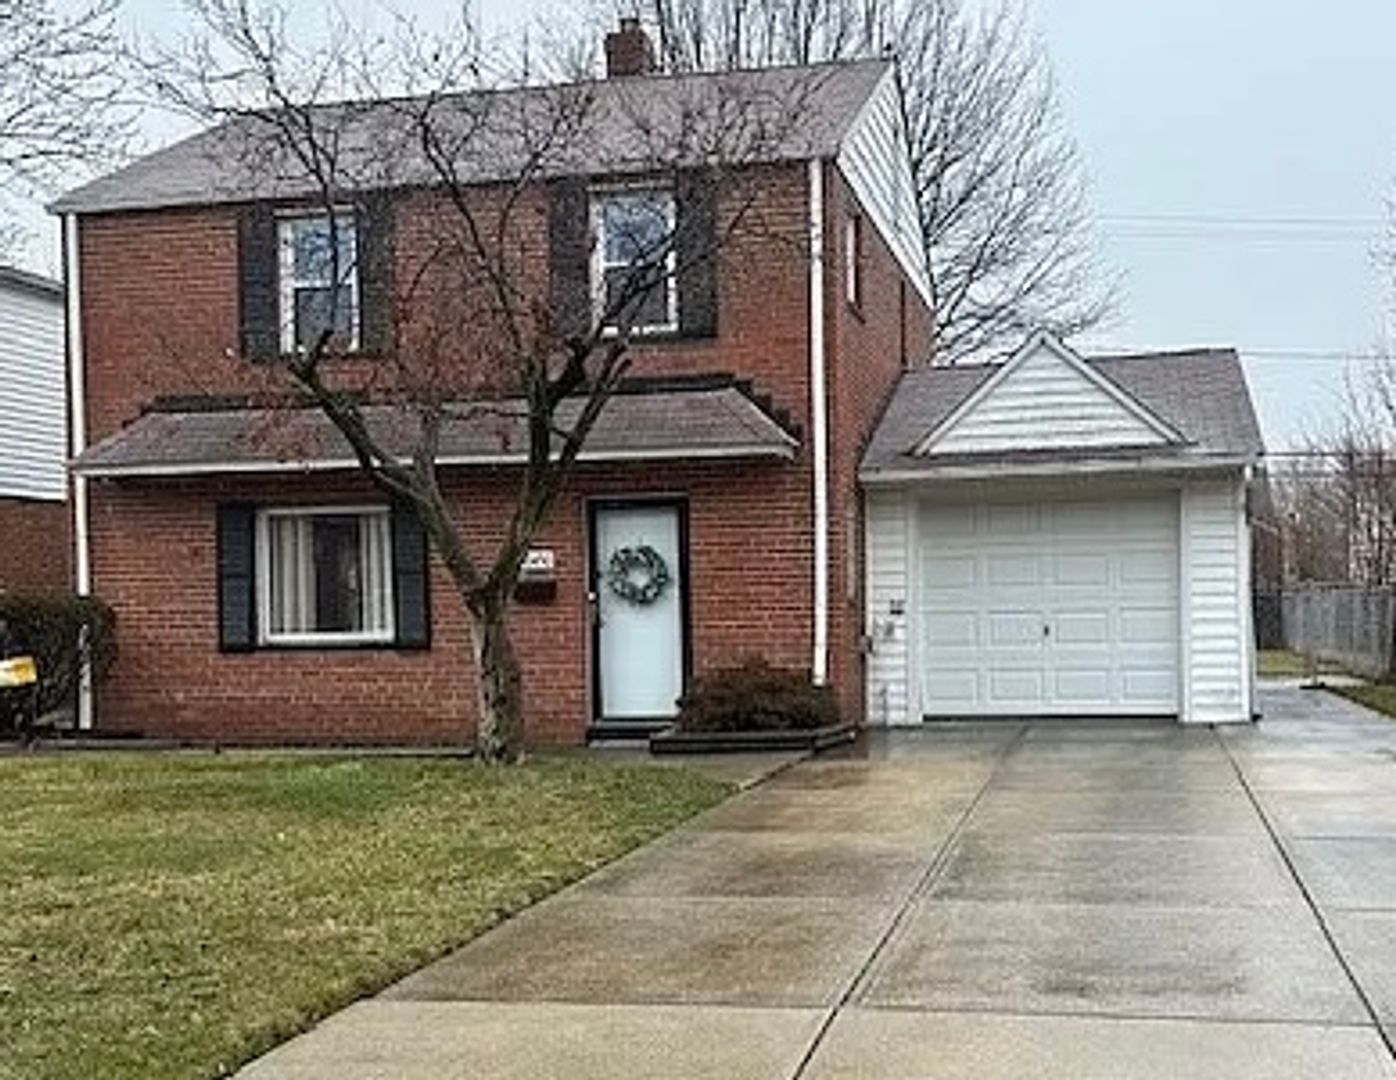 3 BED 2 BATH SINGLE FAMILY HOME IN EUCLID!